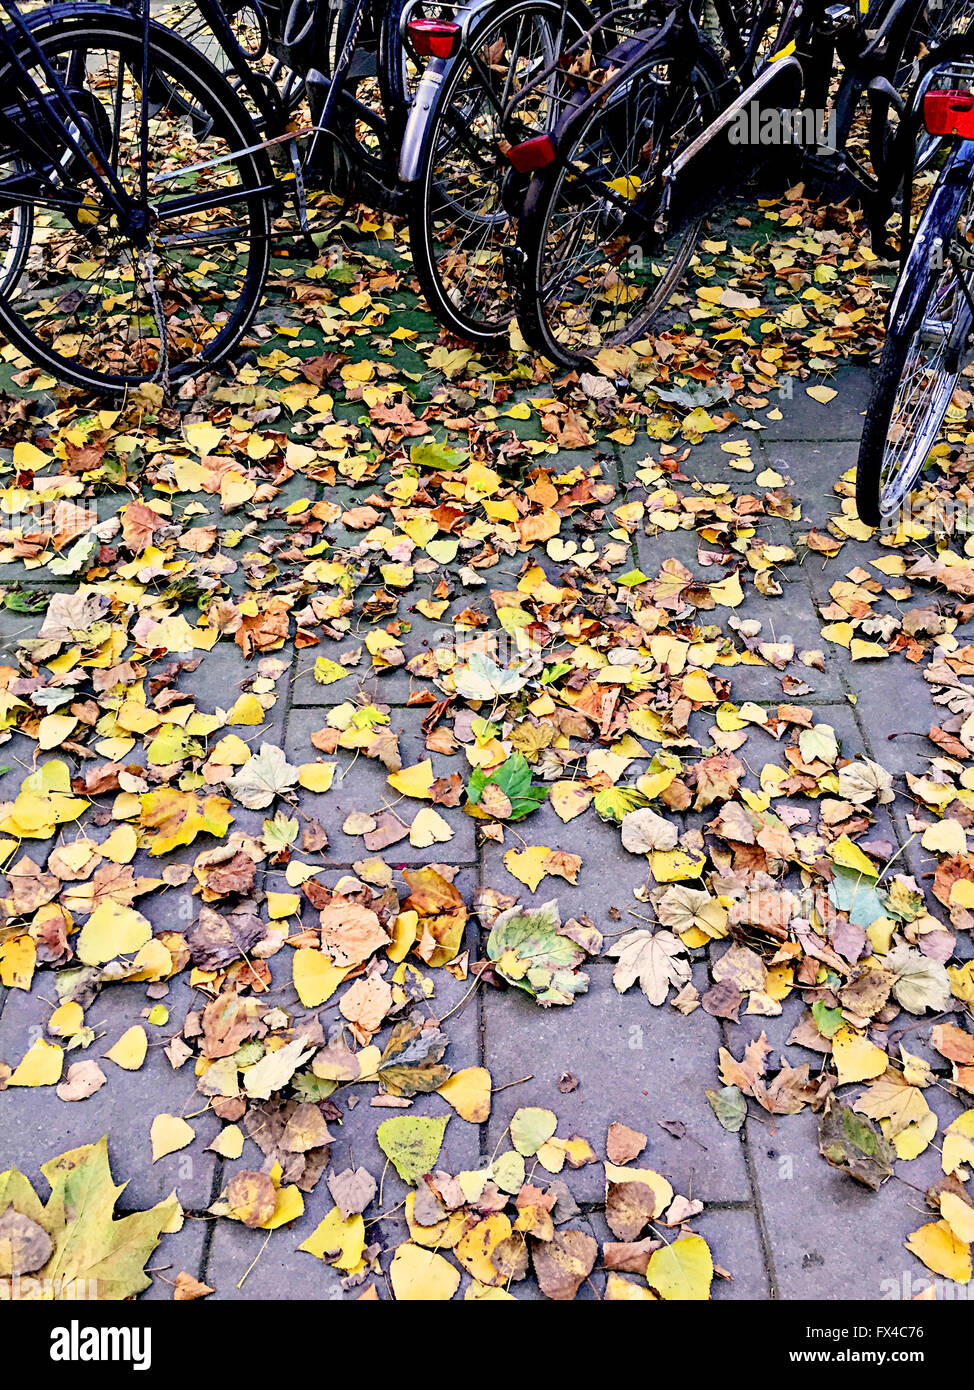 Leaves on ground in Amsterdam Stock Photo